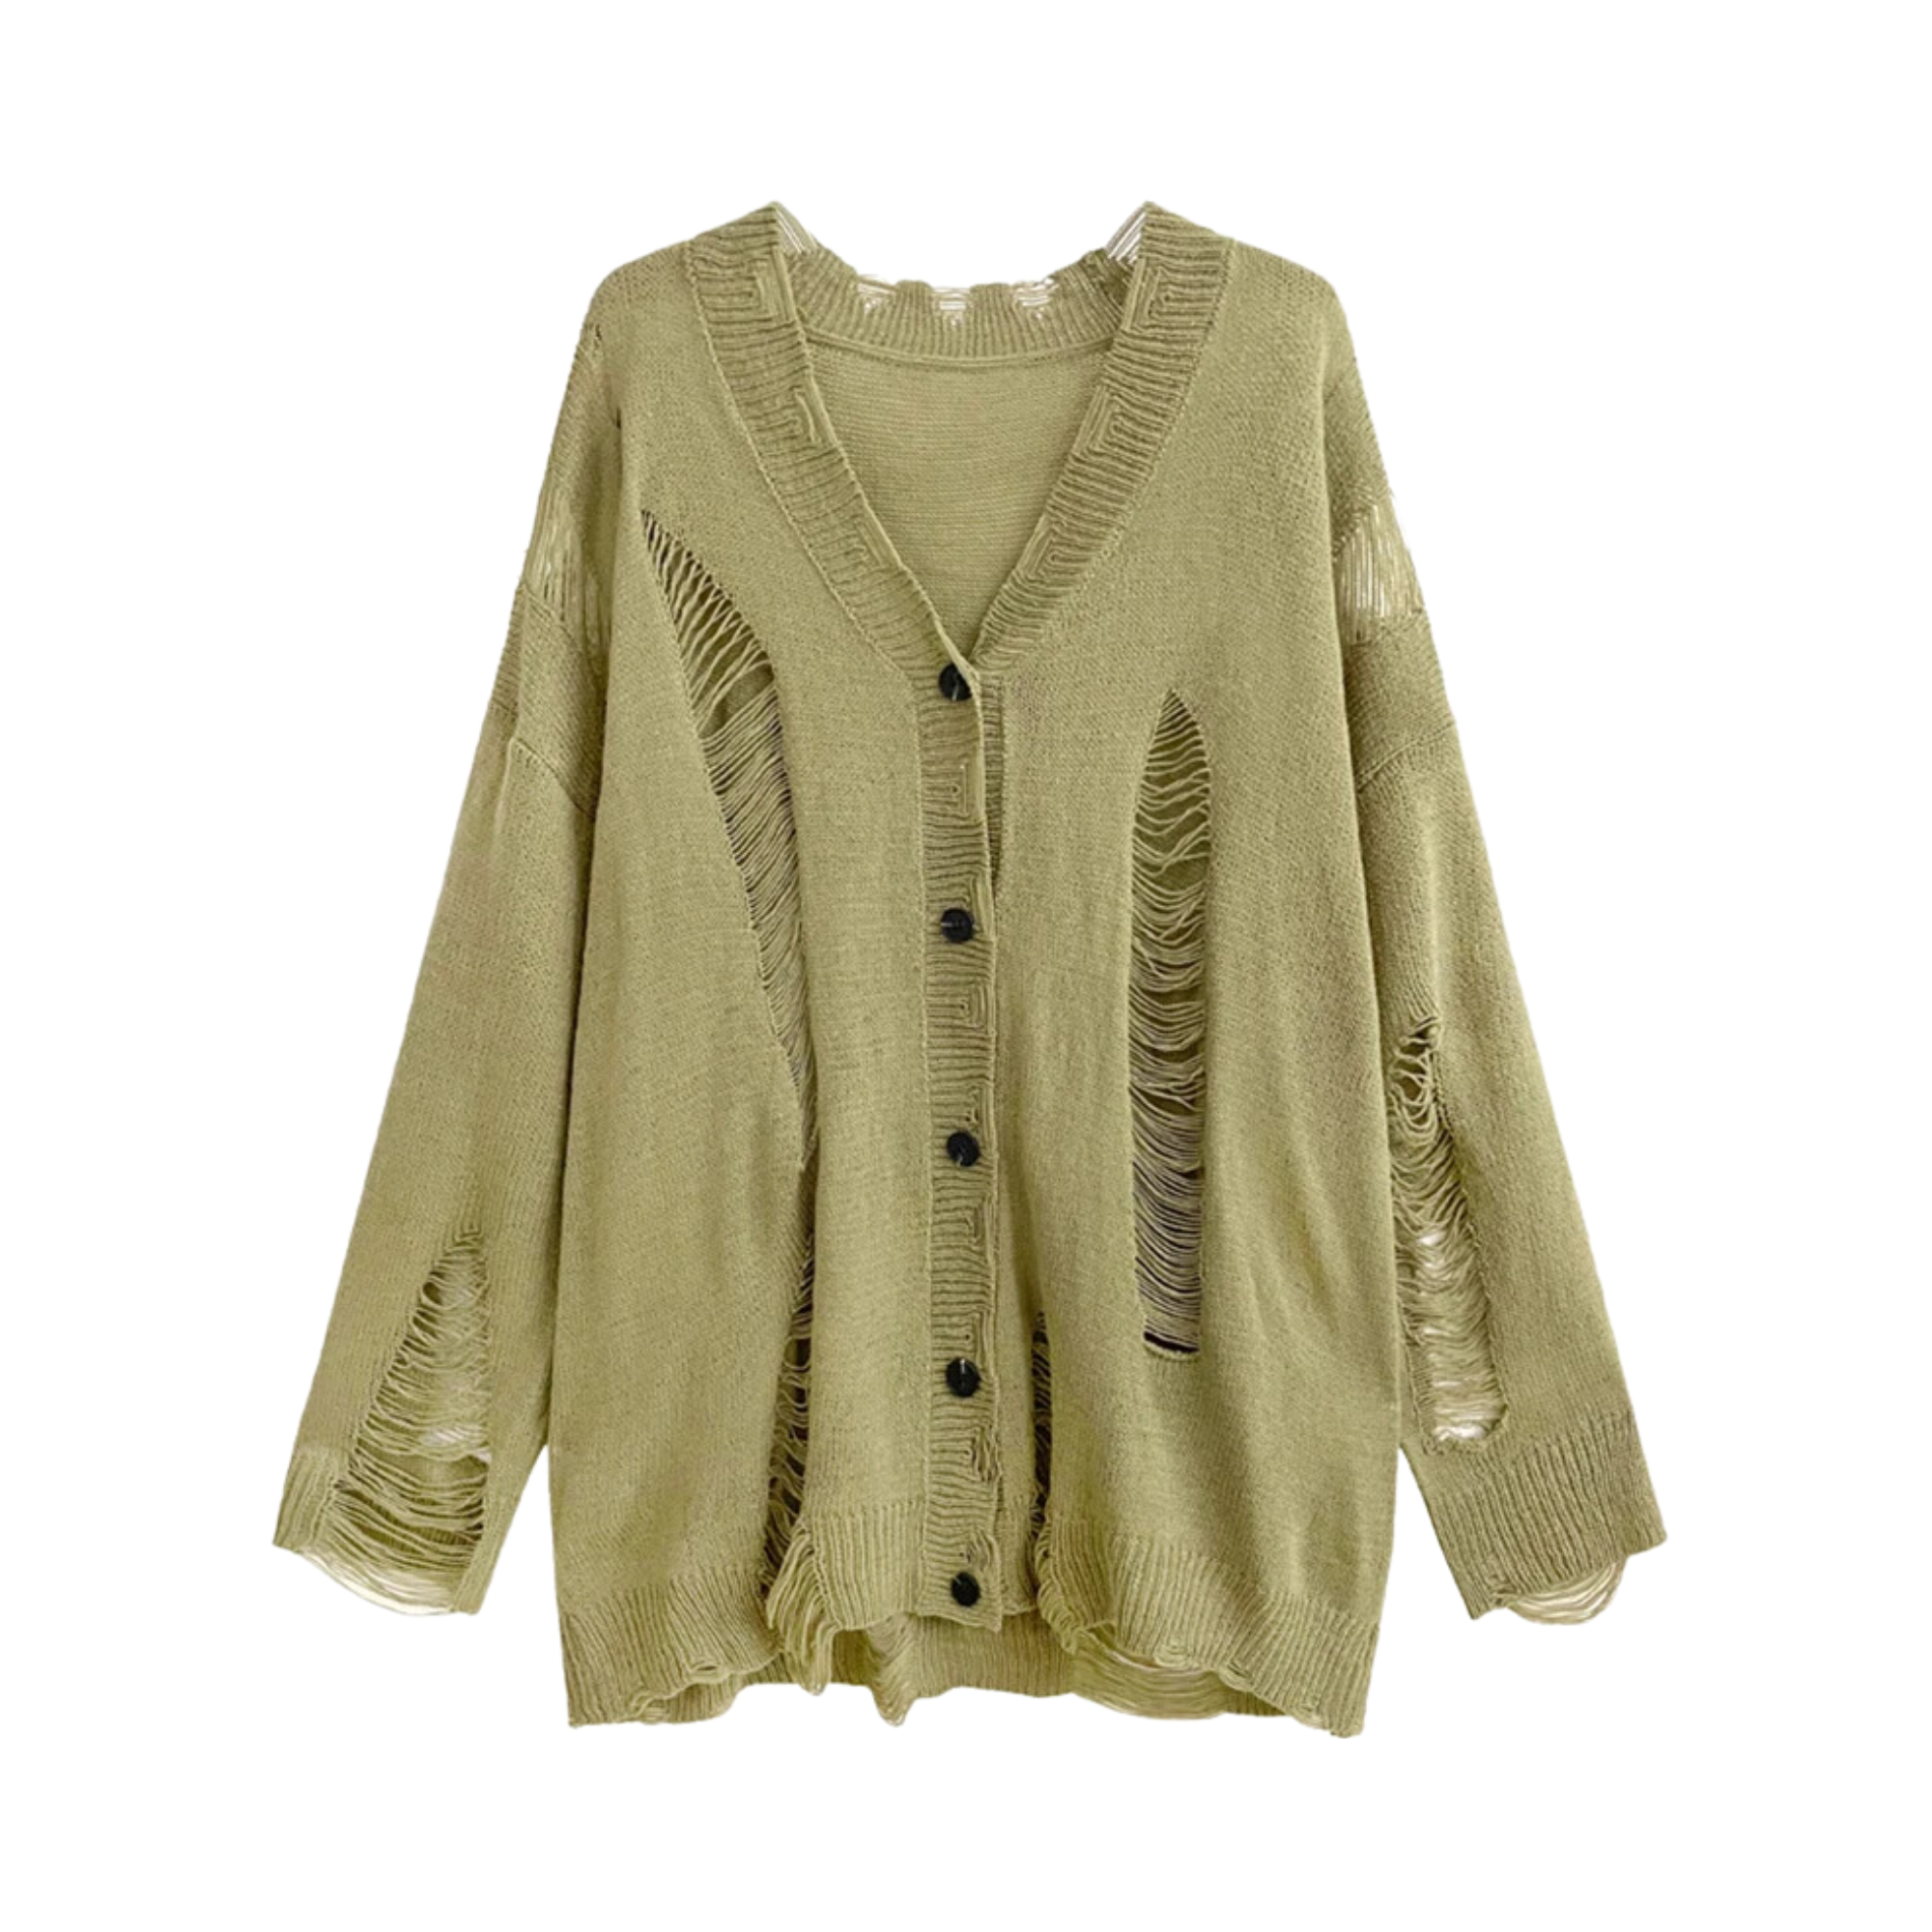 Extreme Distressed Loose Knit Cardigan - Pre Order: Ships Feb 29